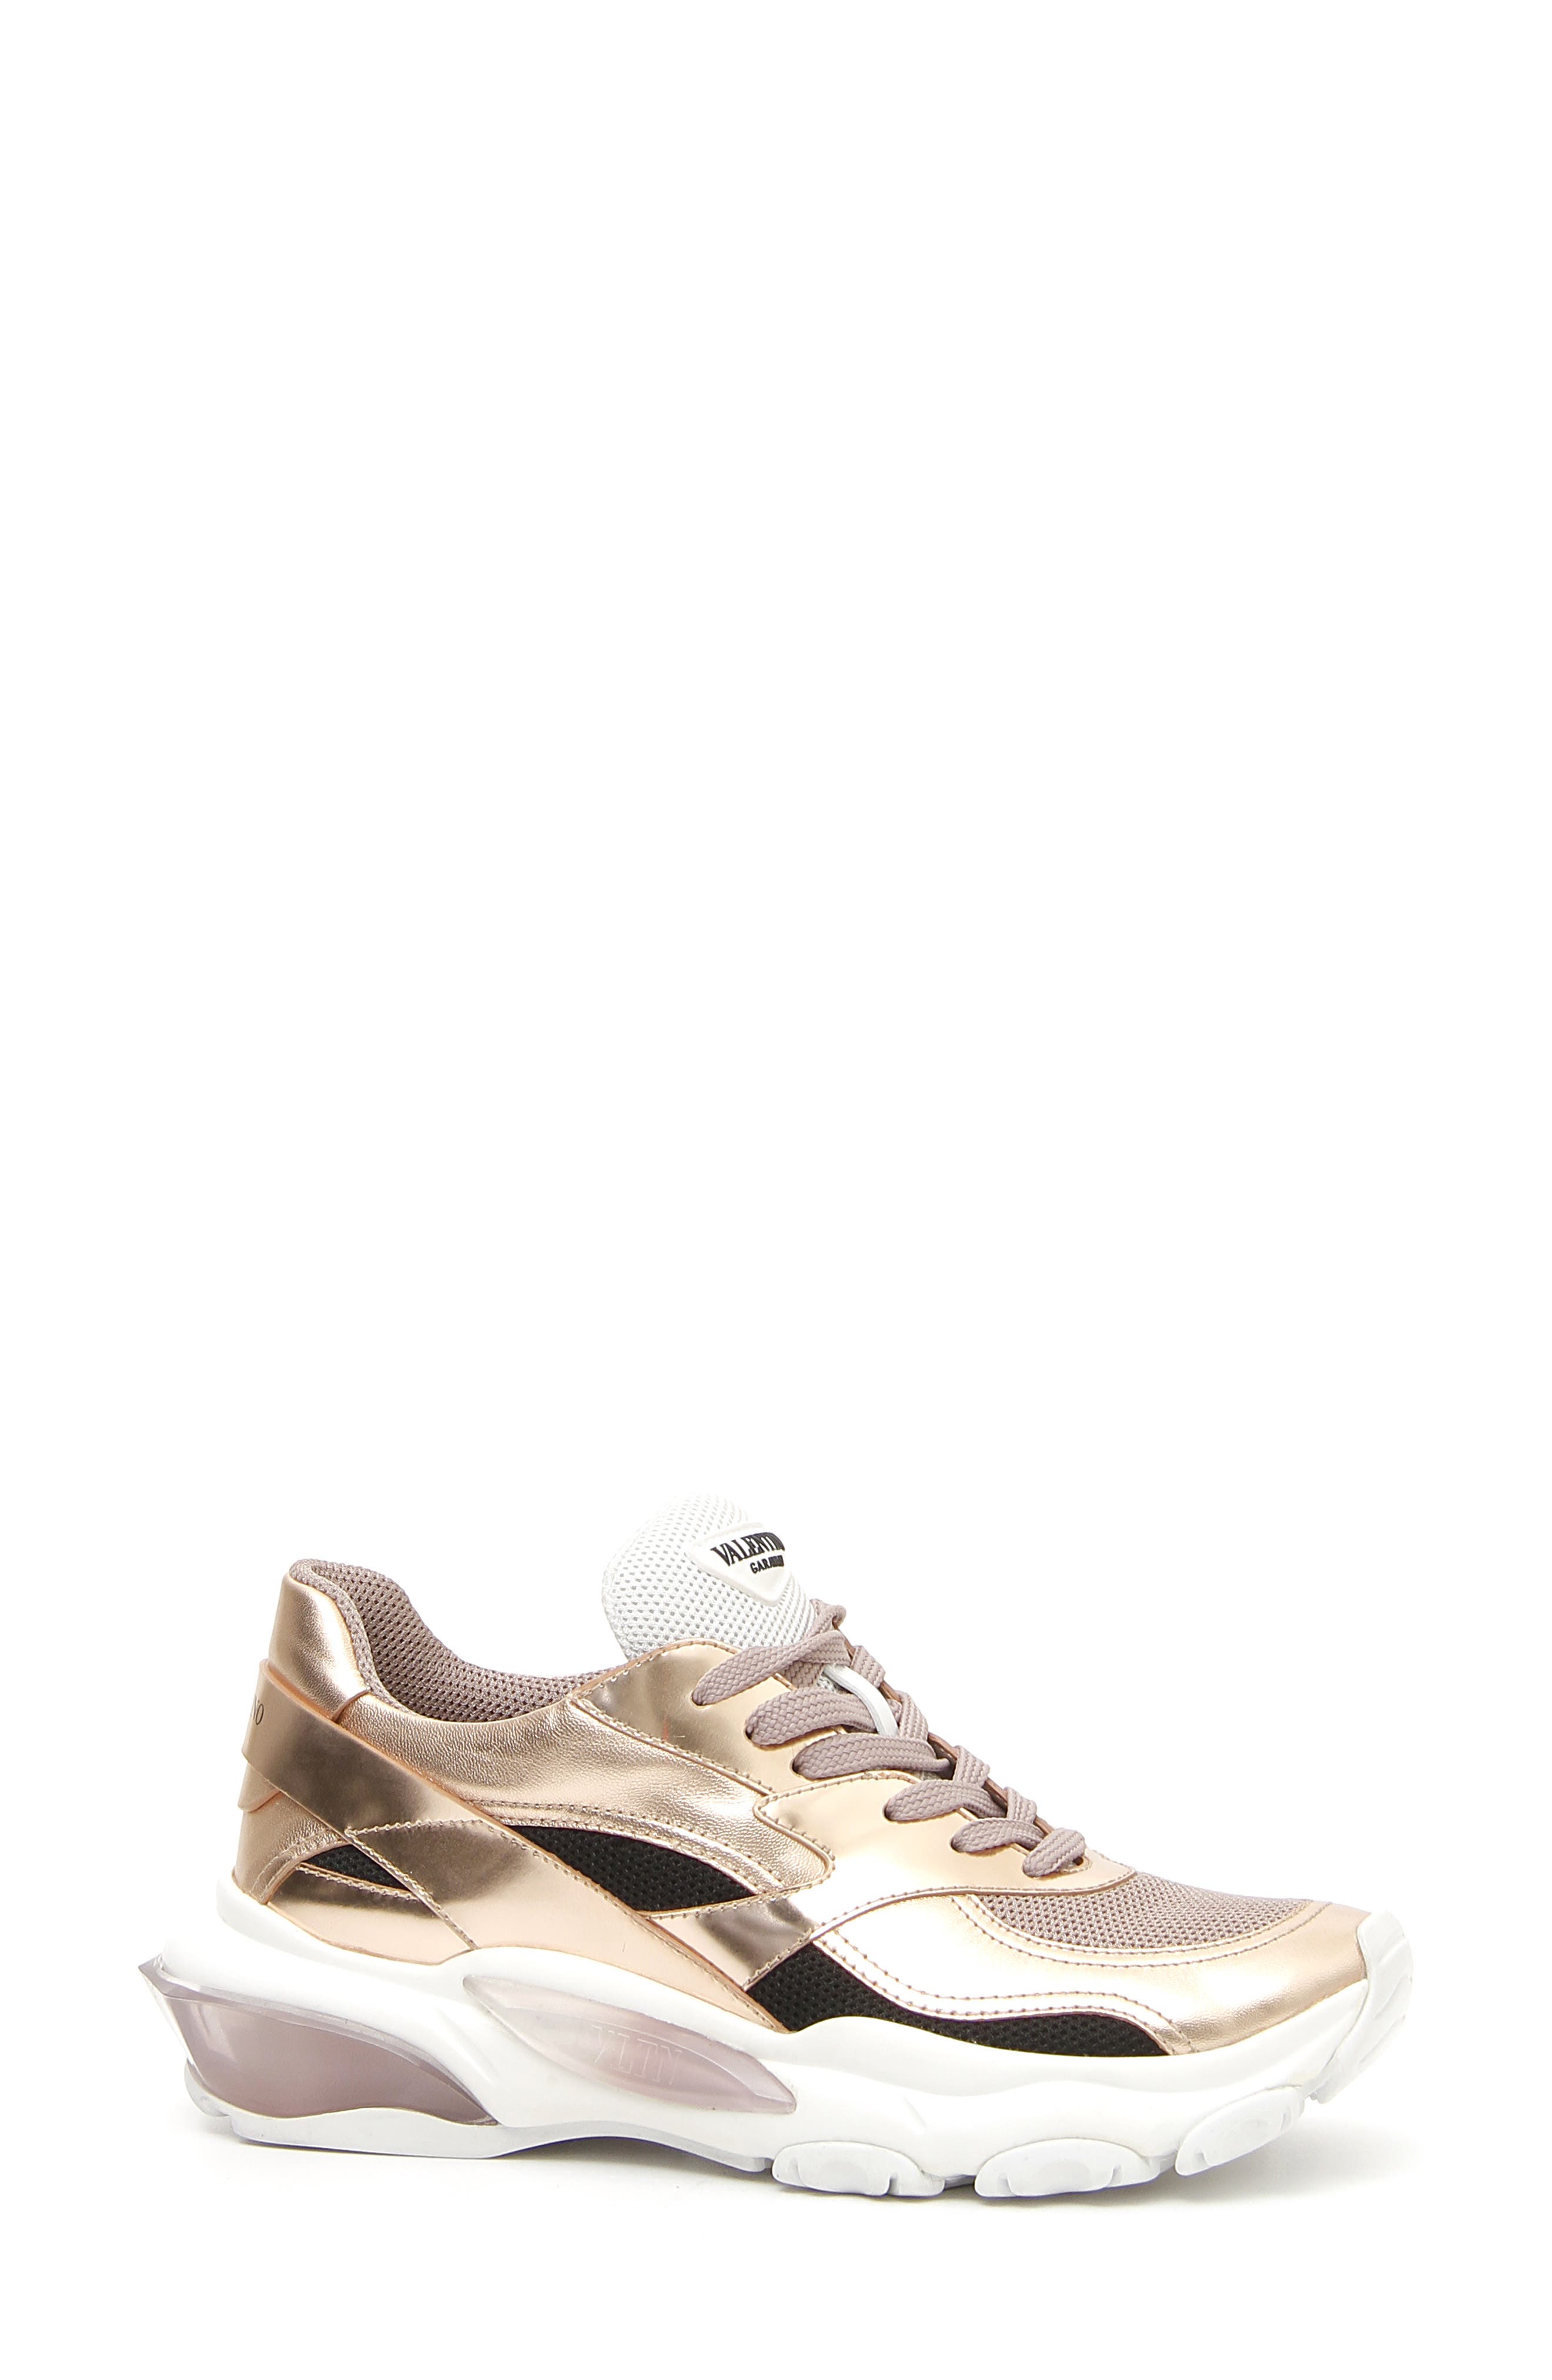 valentino bounce sneakers womens